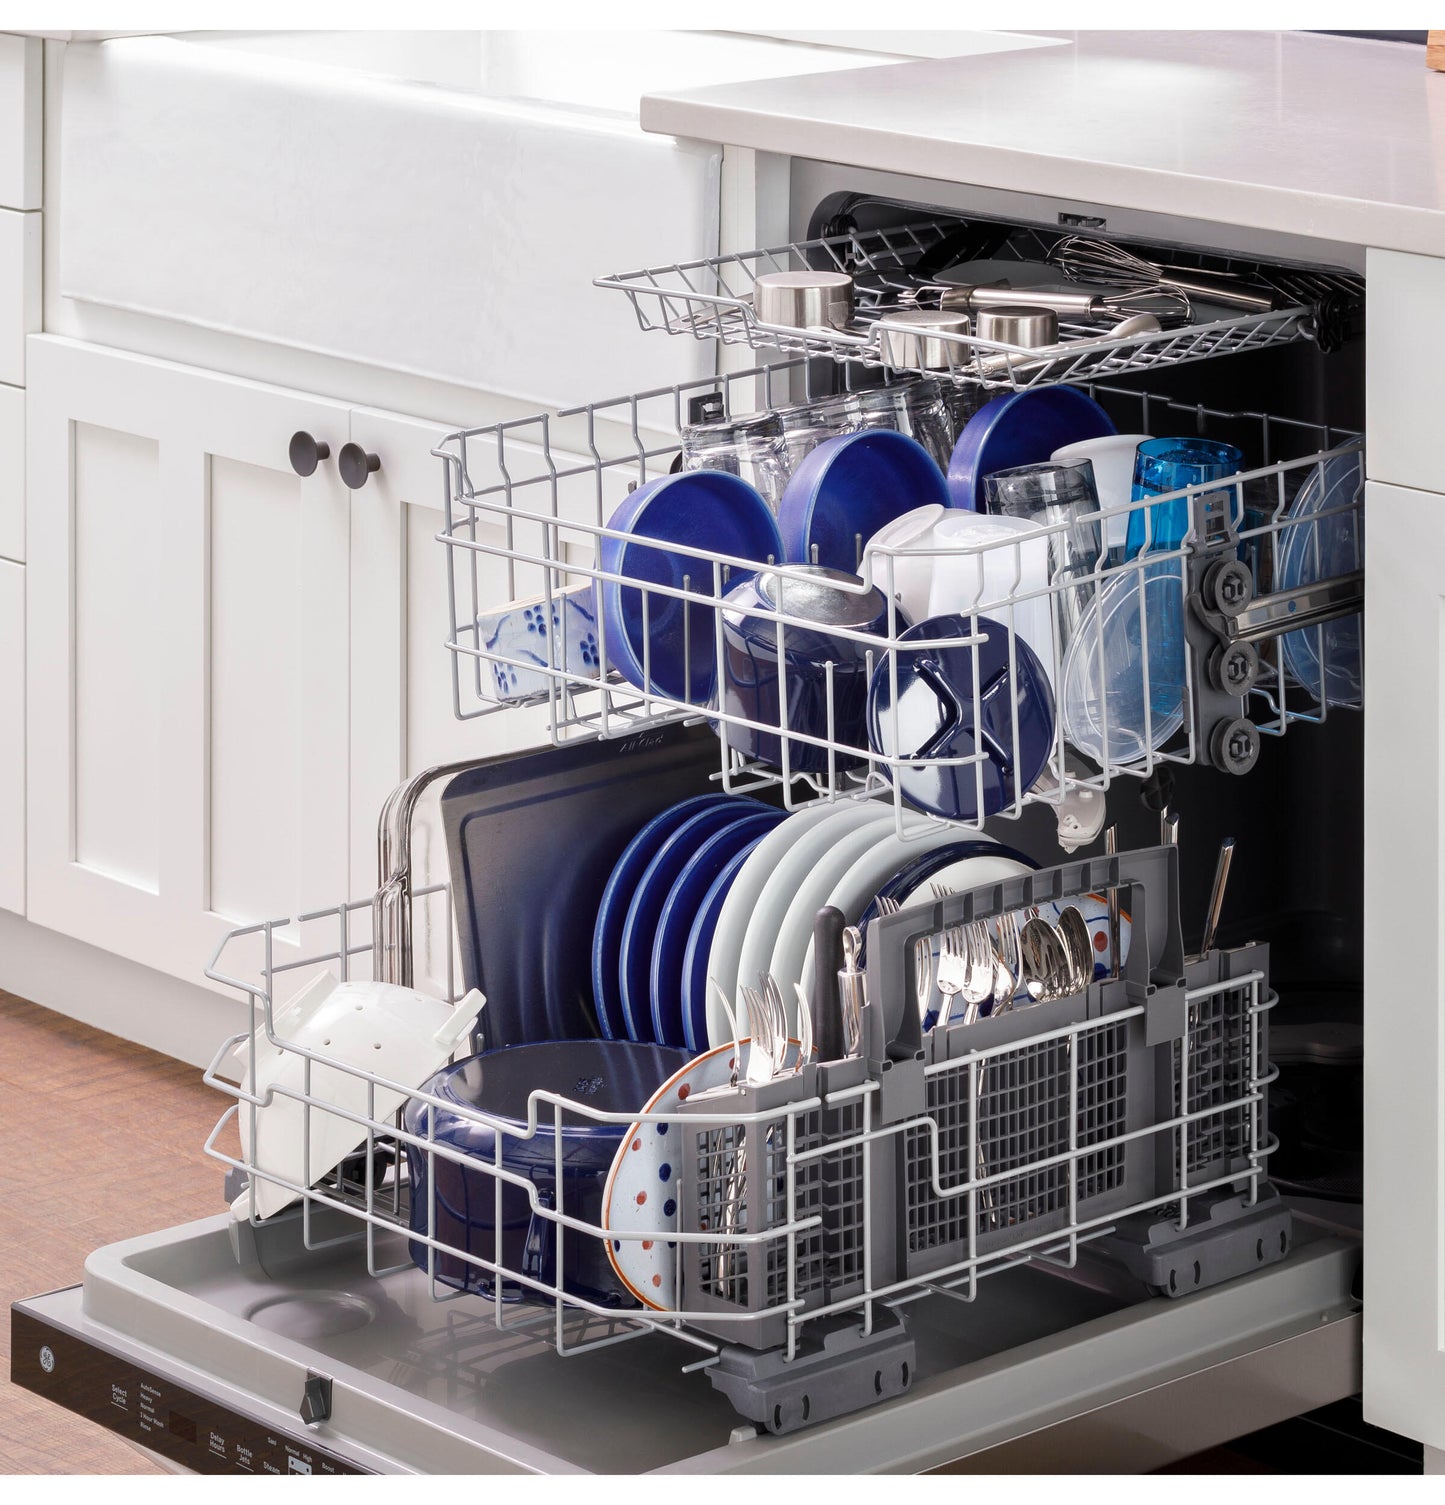 Ge Appliances GDT630PGRBB Ge® Top Control With Plastic Interior Dishwasher With Sanitize Cycle & Dry Boost